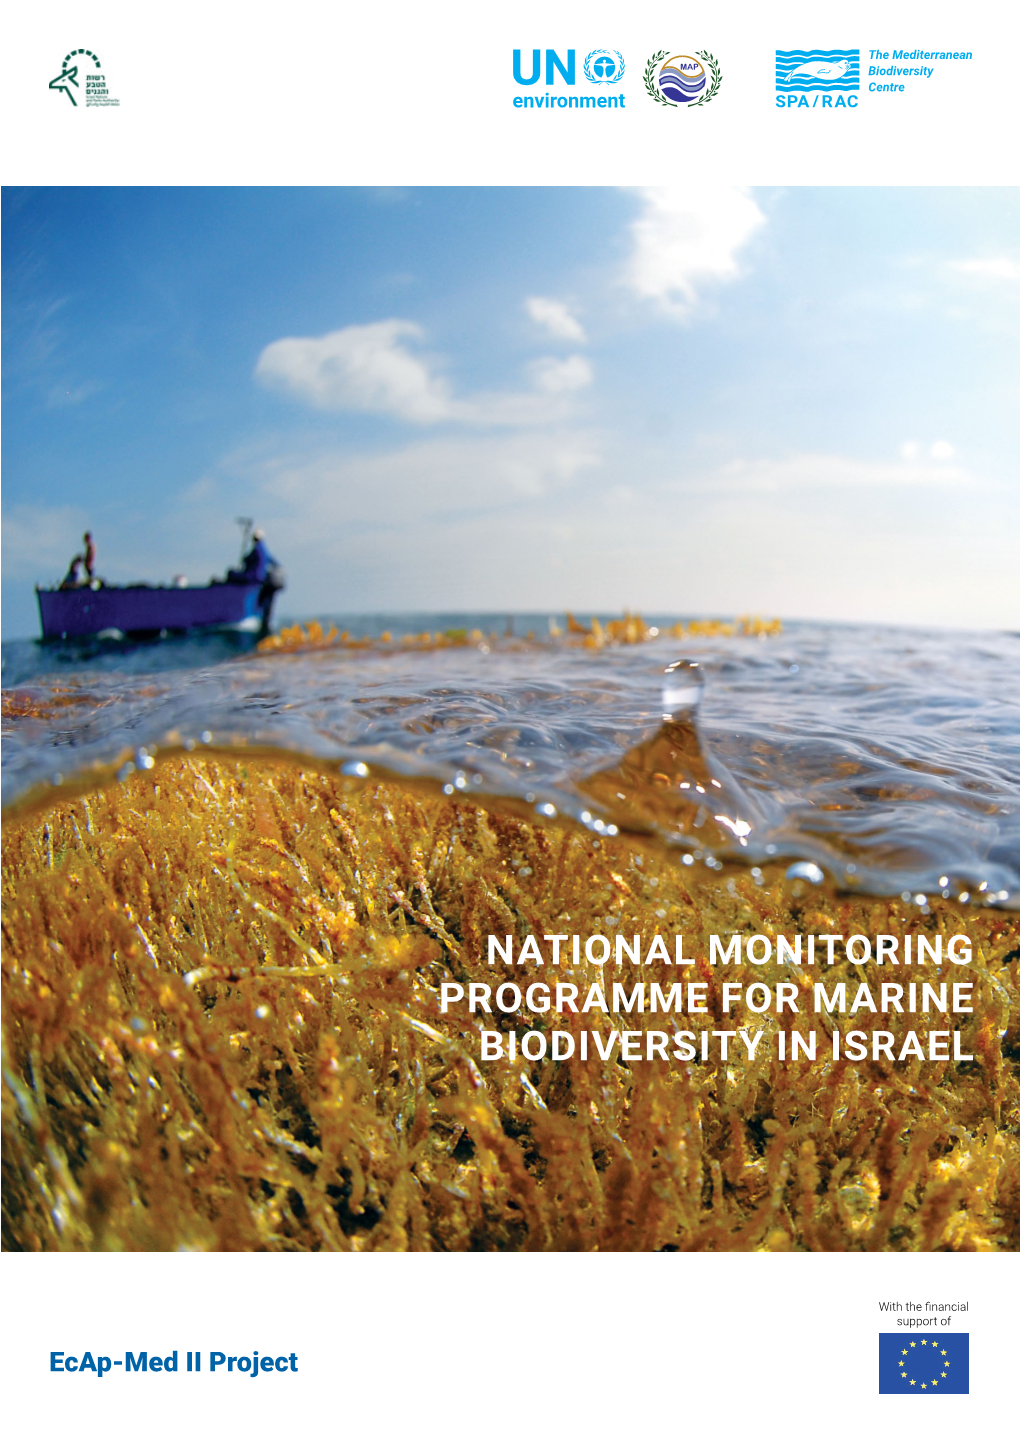 National Monitoring Programme for Marine Biodiversity in Israel